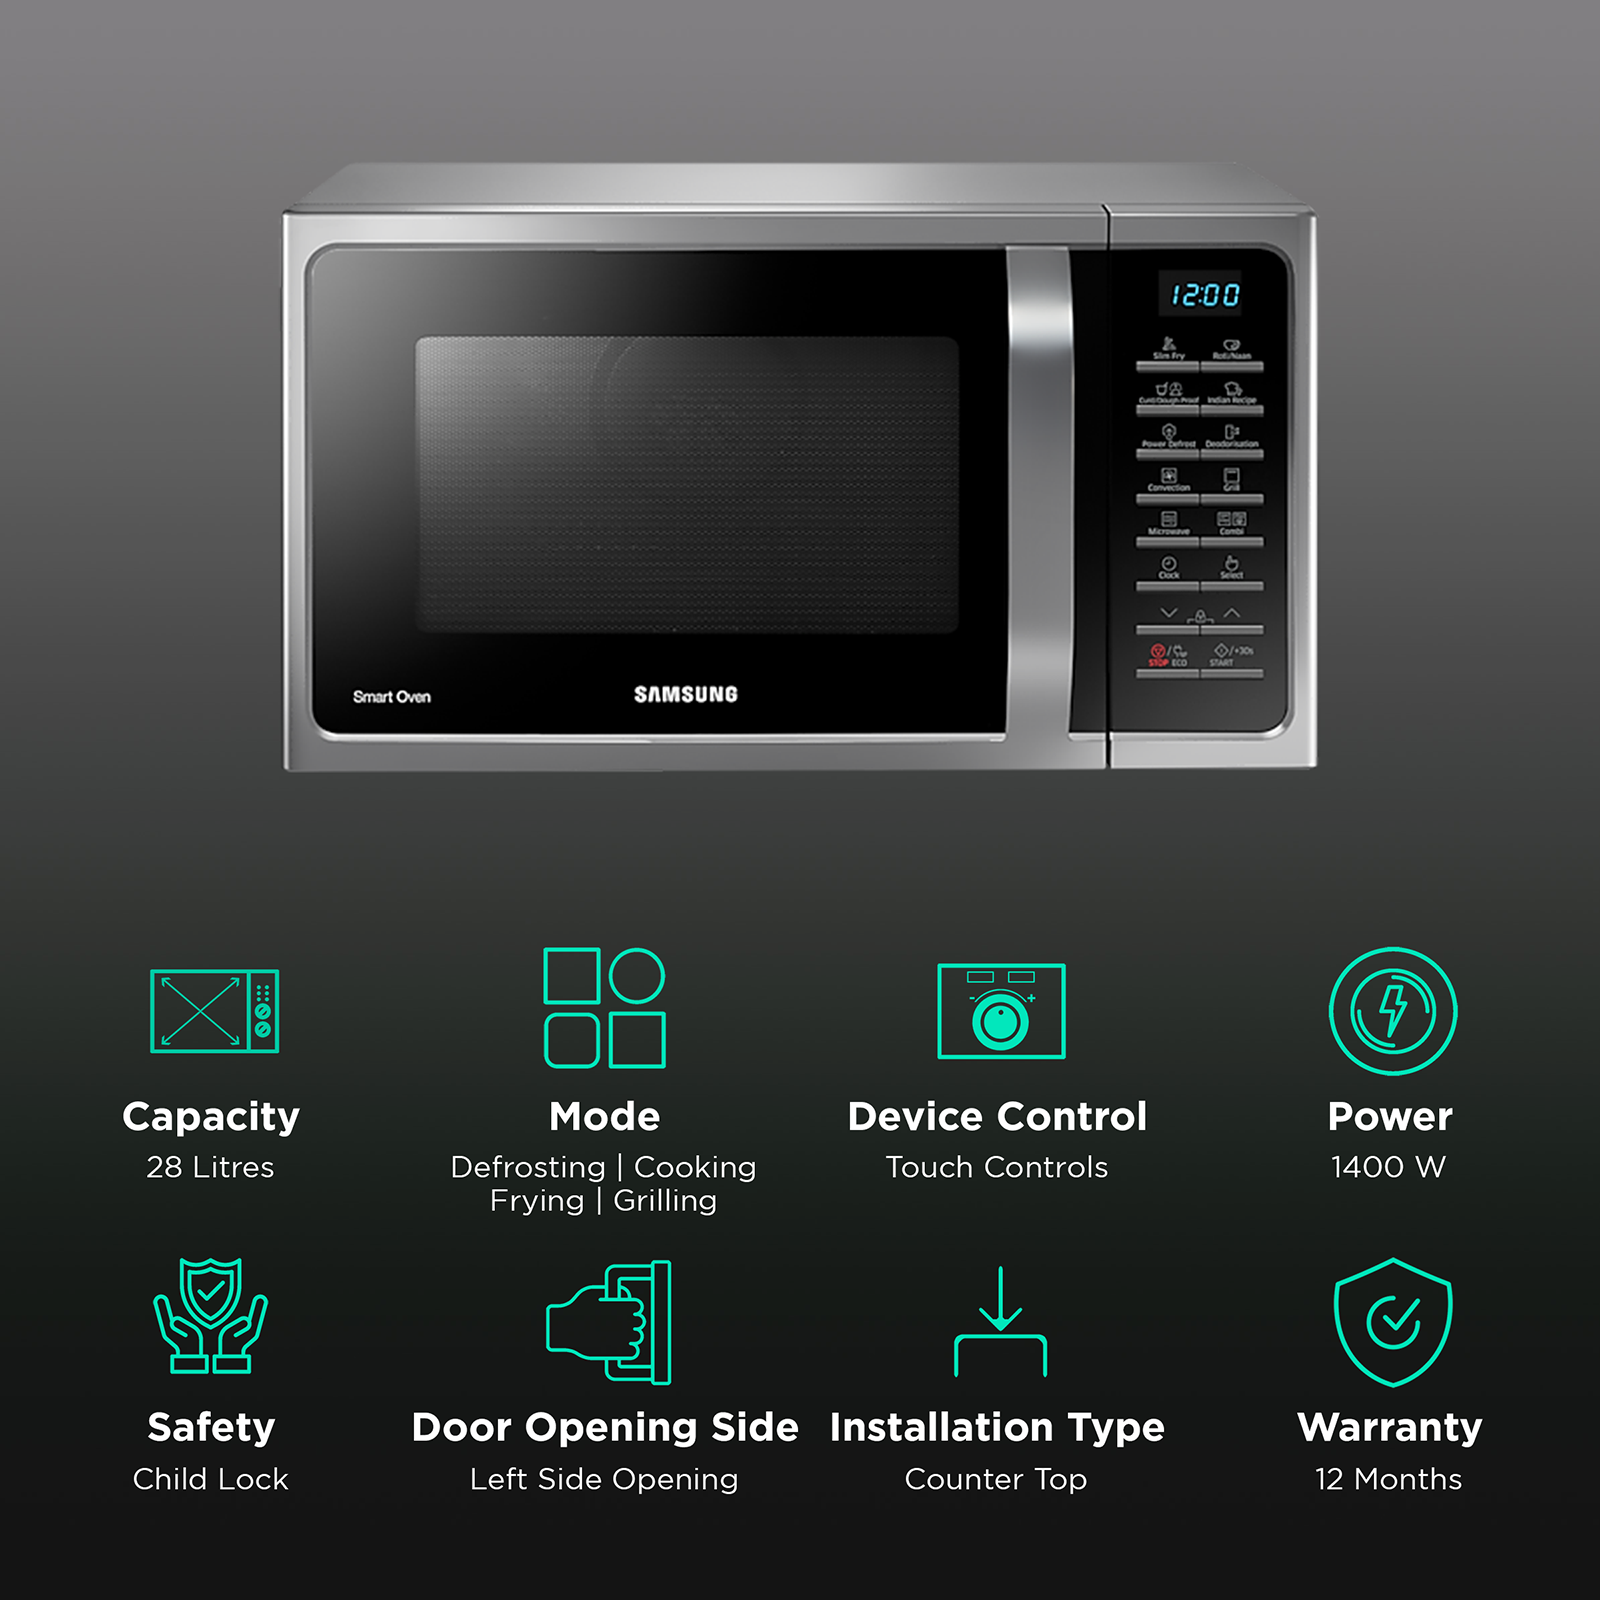 Buy Samsung 28 Litre Convection Microwave Oven (MC28A5033CK/TL